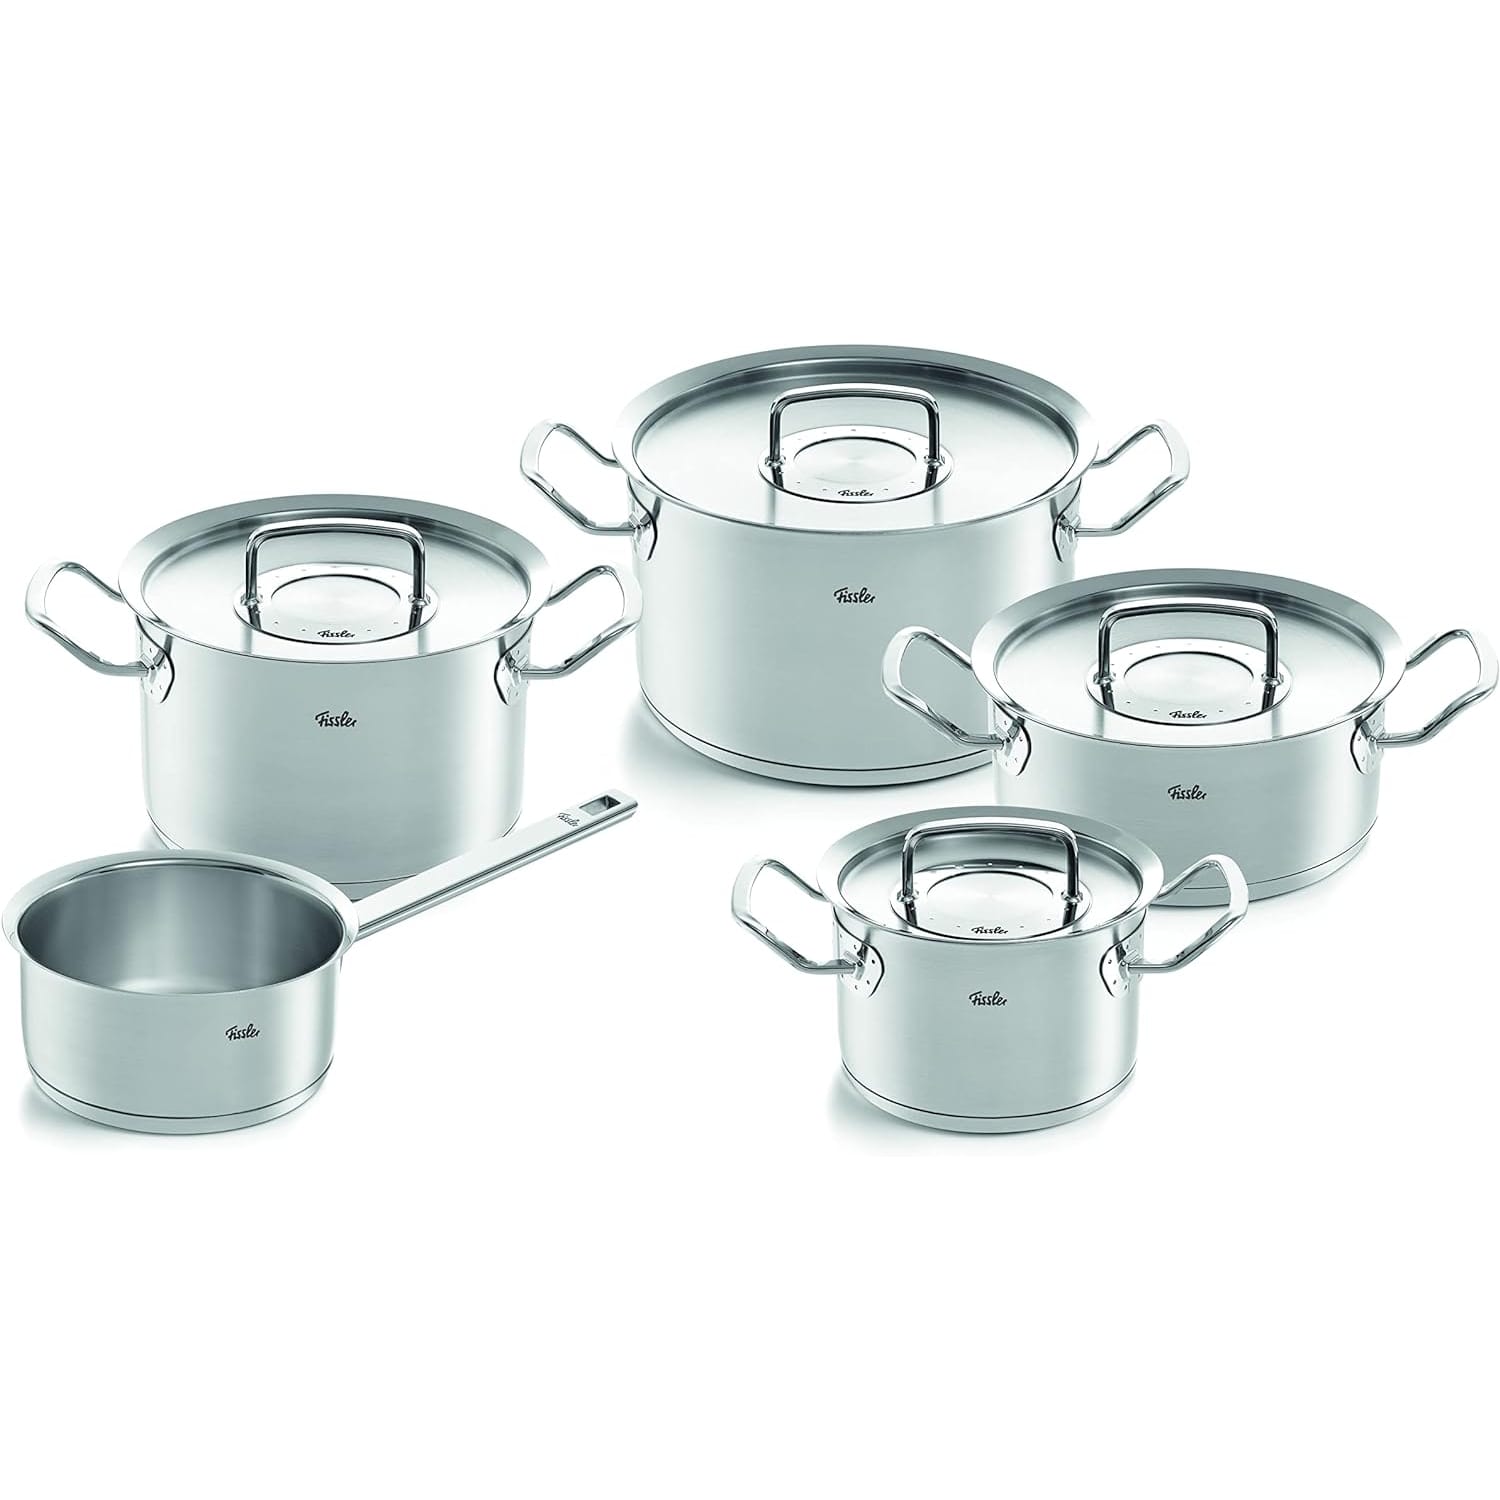 https://cdn.apartmenttherapy.info/image/upload/v1699580343/gen-workflow/product-database/fissler-original-collection-stainless-steel-cookware-9-piece-amazon.jpg